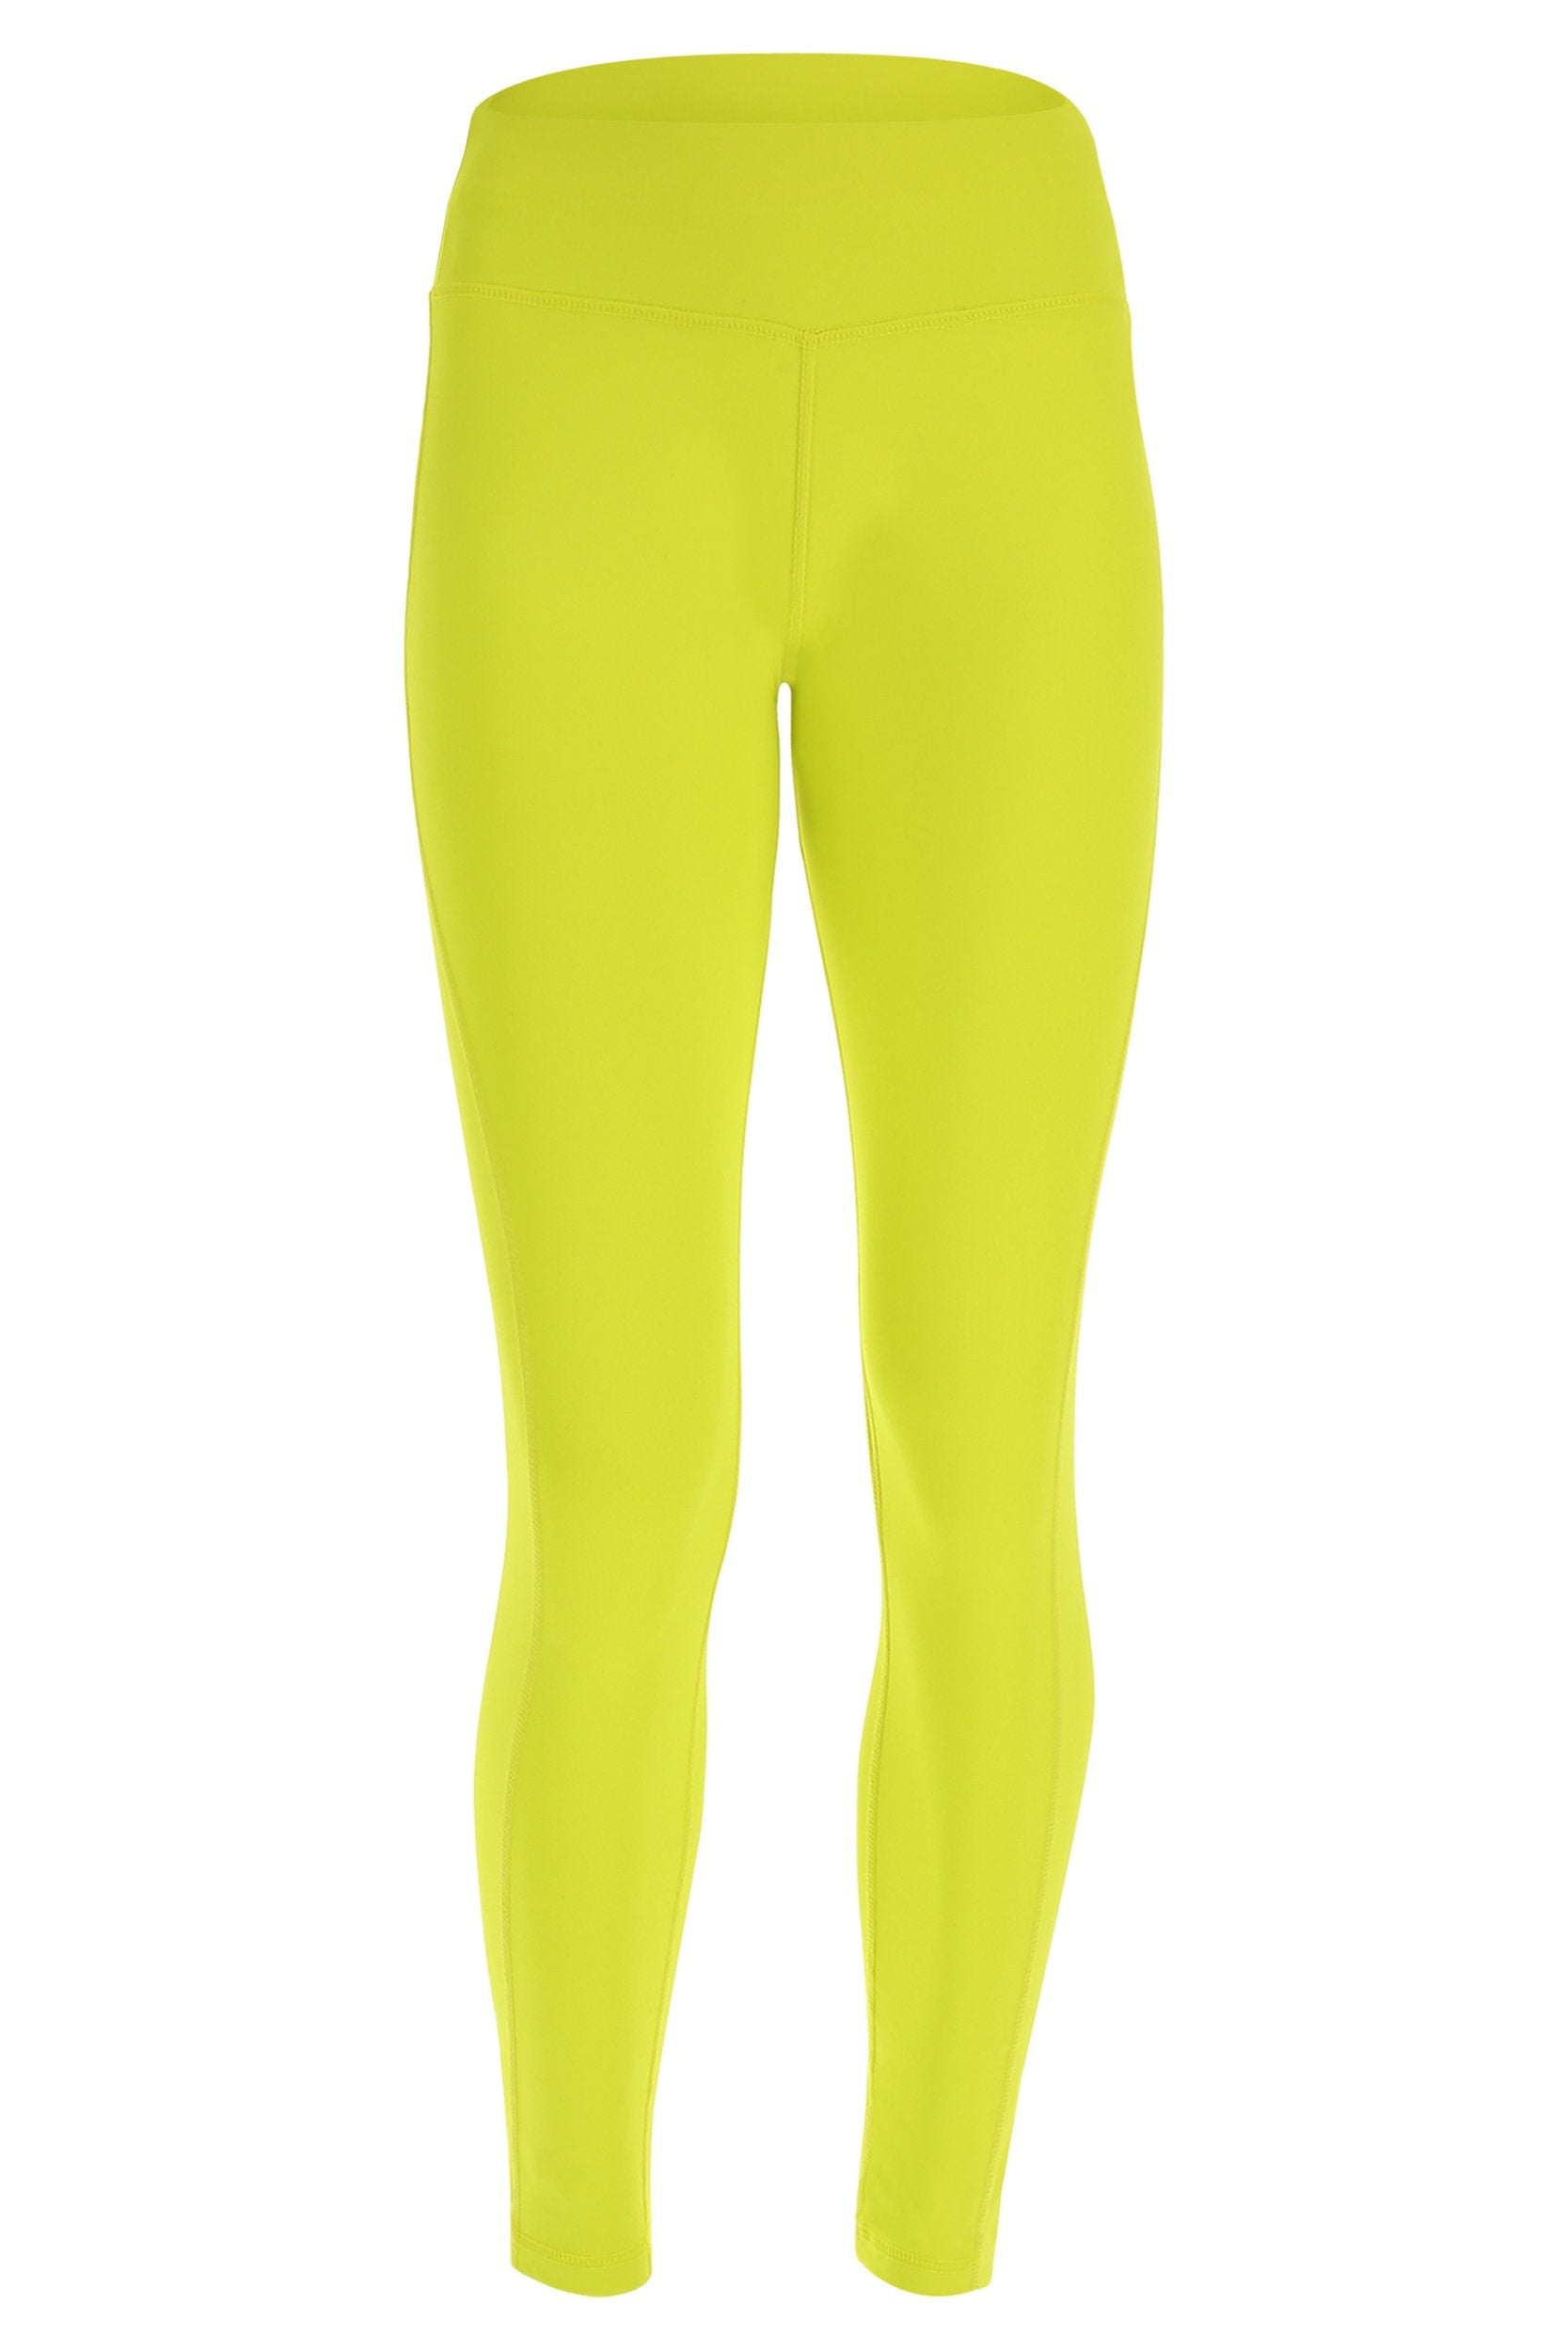 WR.UP® Diwo Pro - High Waisted - 7/8 Length Trousers - Yellow 2